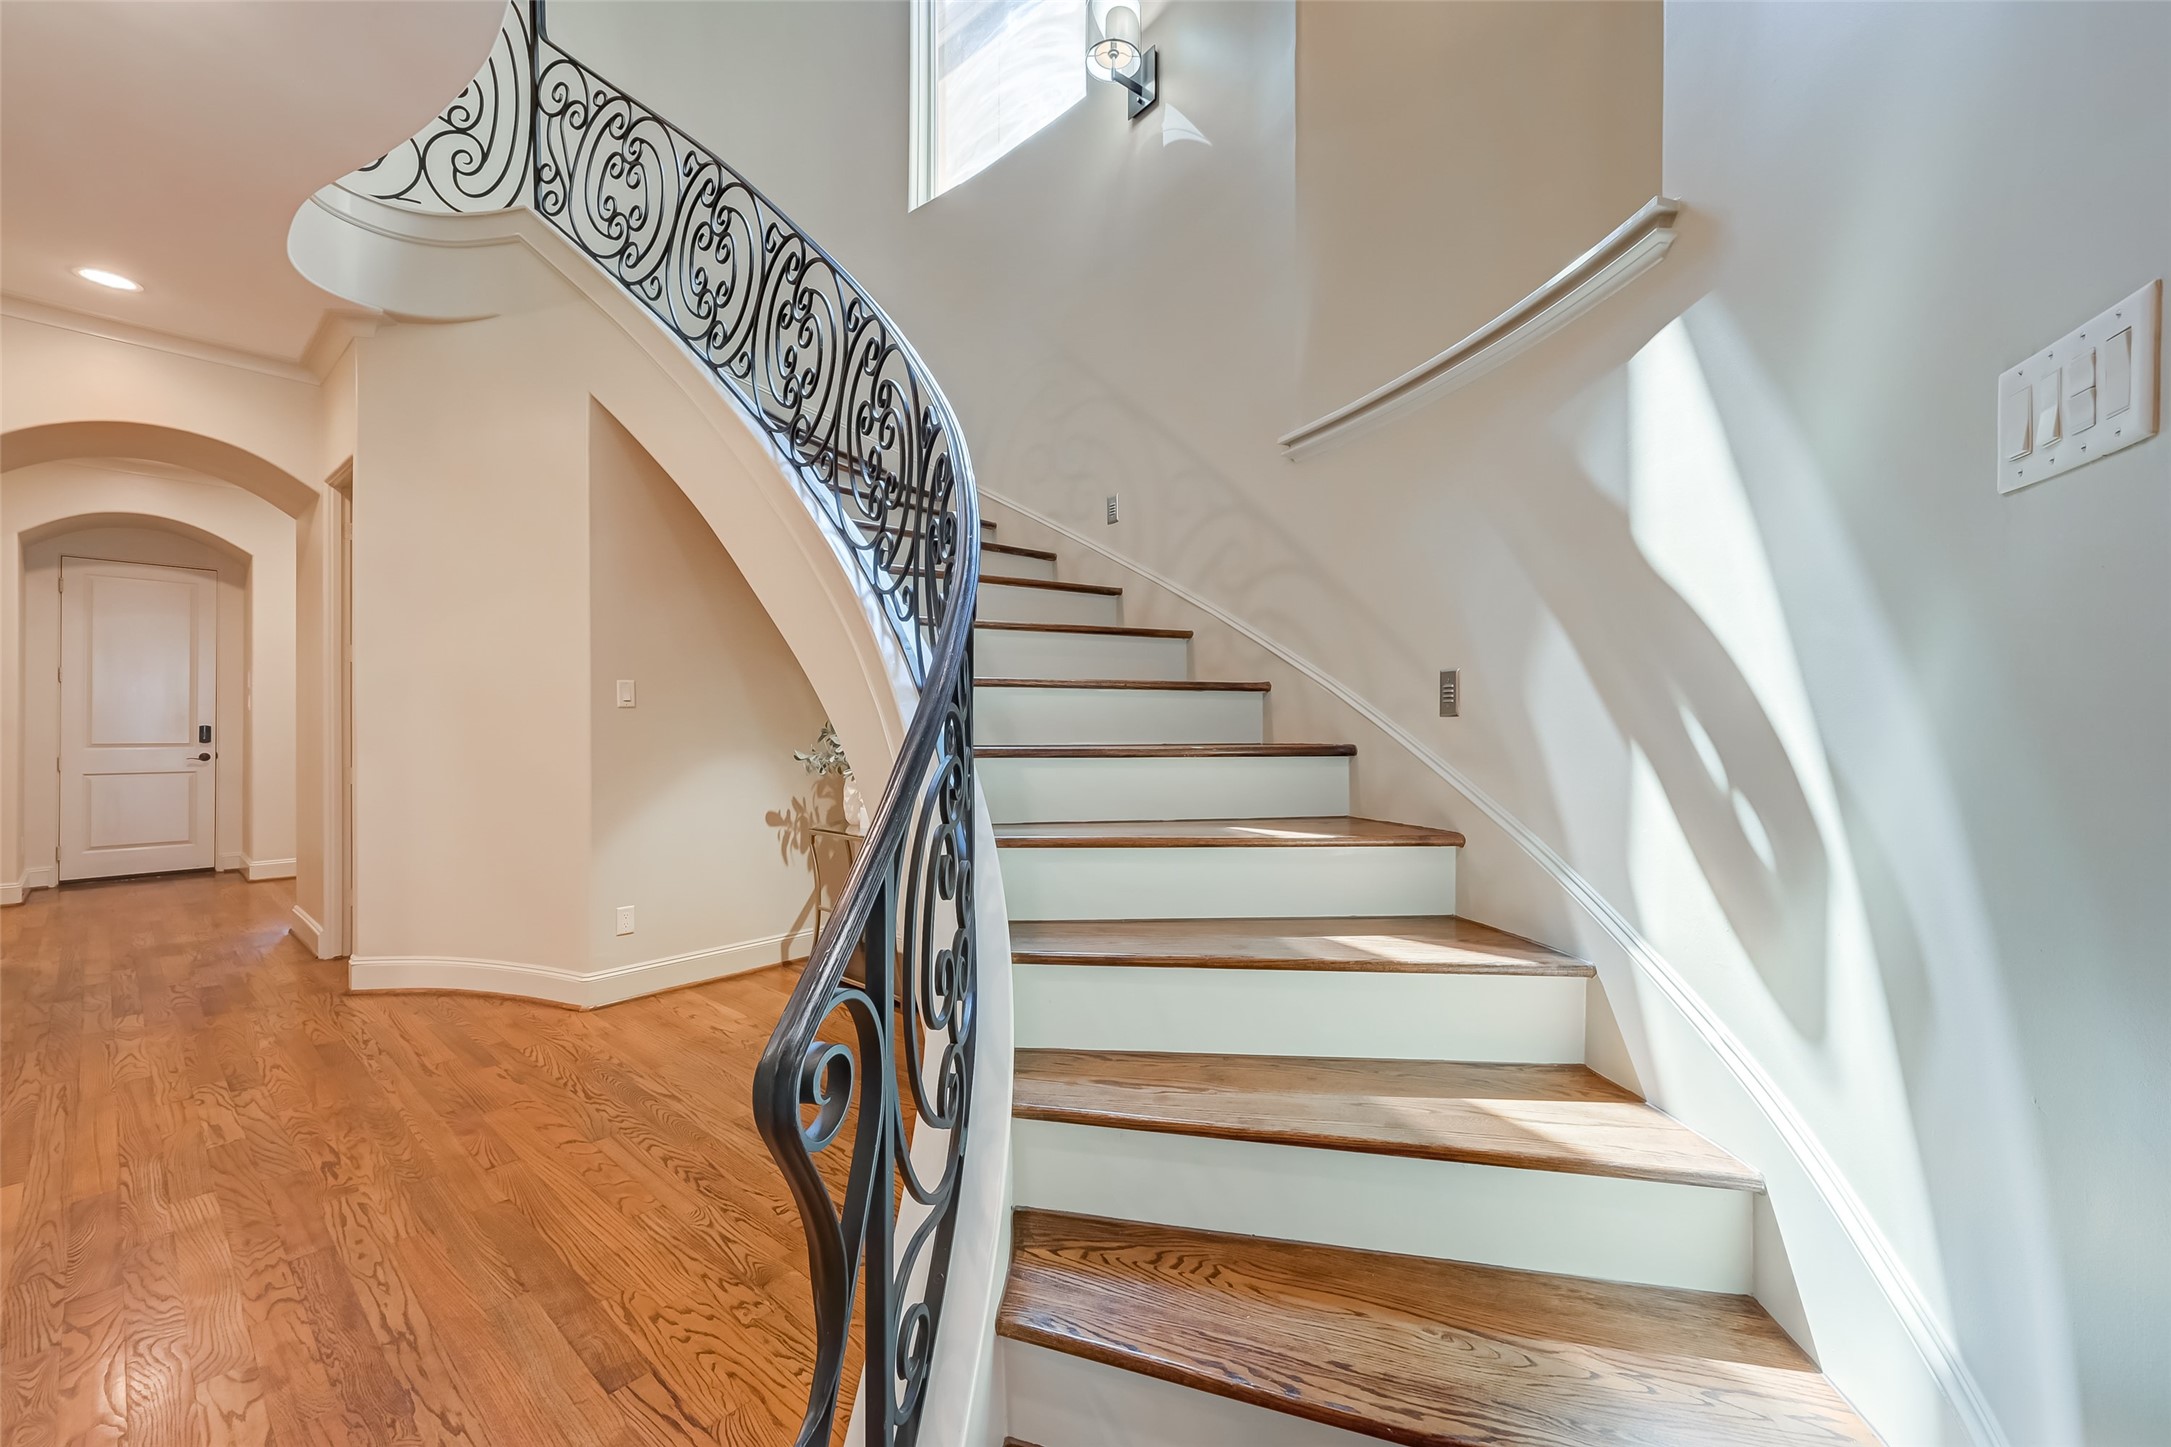 The wrought iron sweeping staircase is such a great architectural feature of this home!